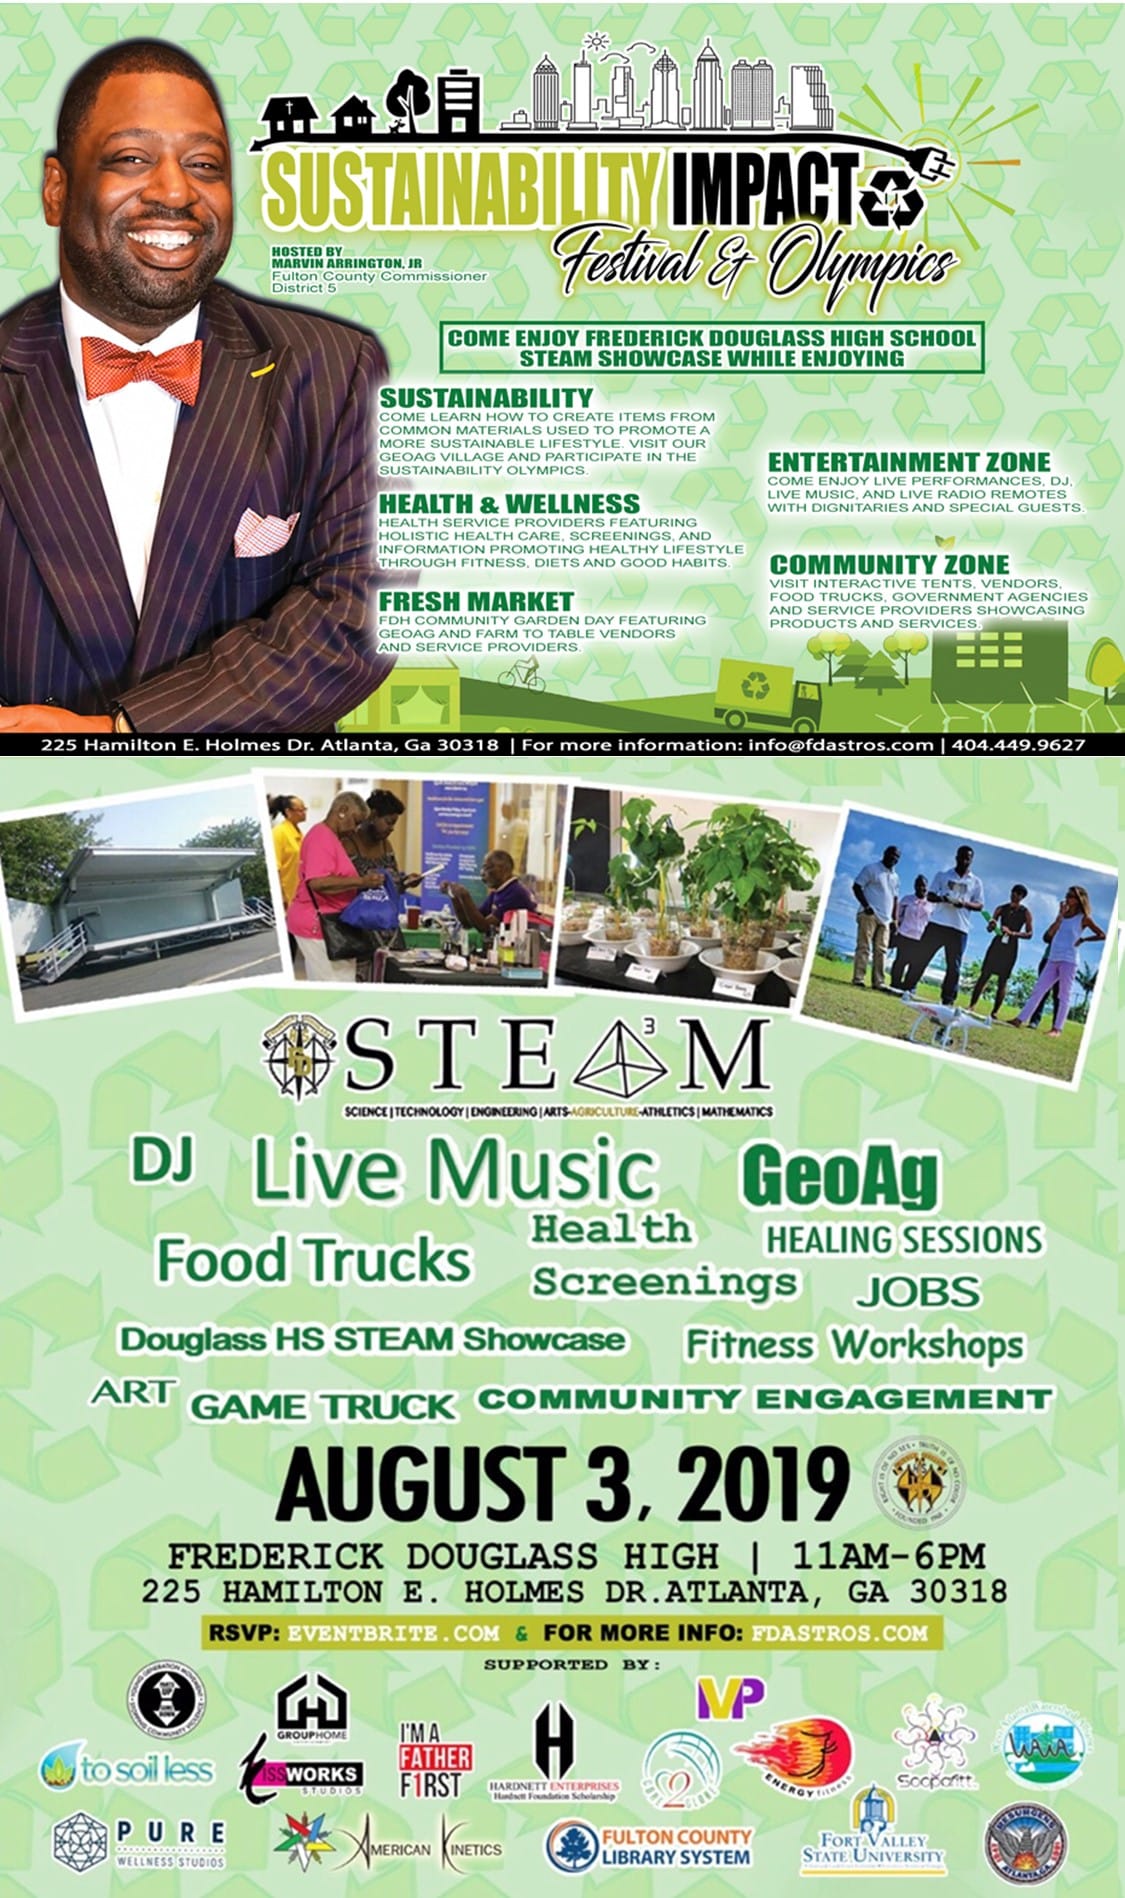 SUSTAINABILITY IMPACT FESTIVAL & OLYMPICS  AUGUST 3, 2019 at 11-6pm